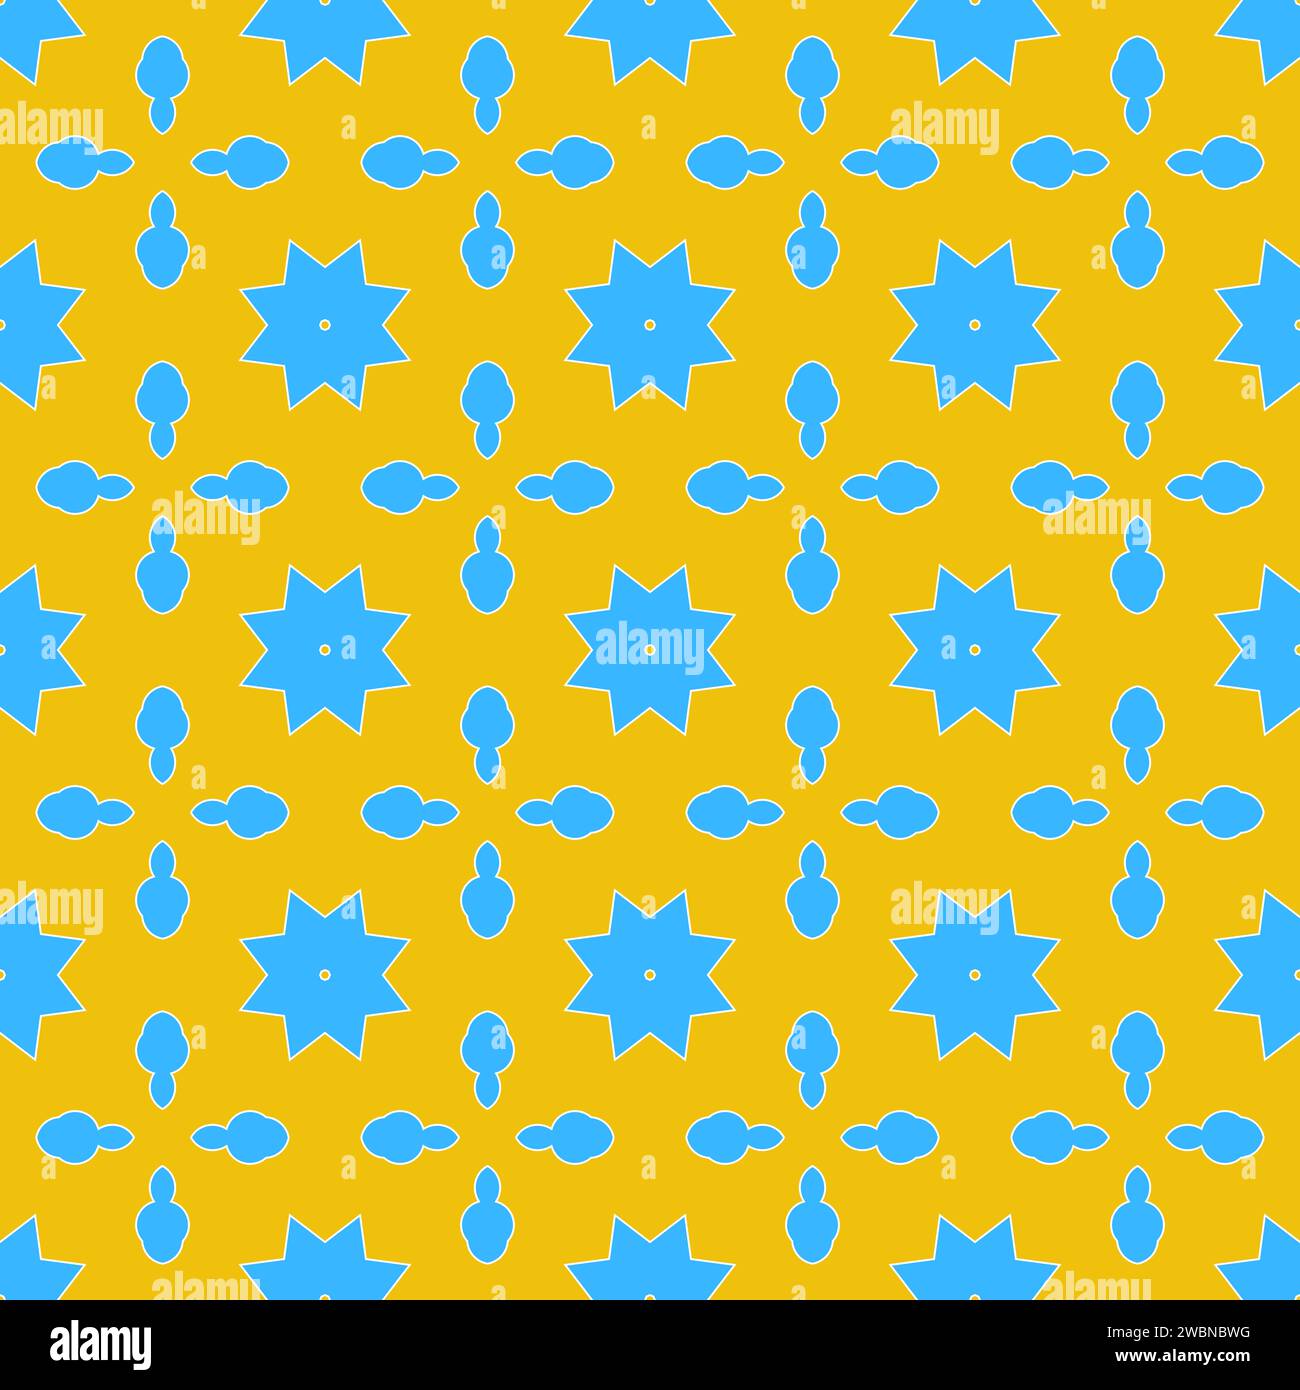 This image features a seamless repeating pattern of vibrant blue circles on a sunny yellow background Stock Photo